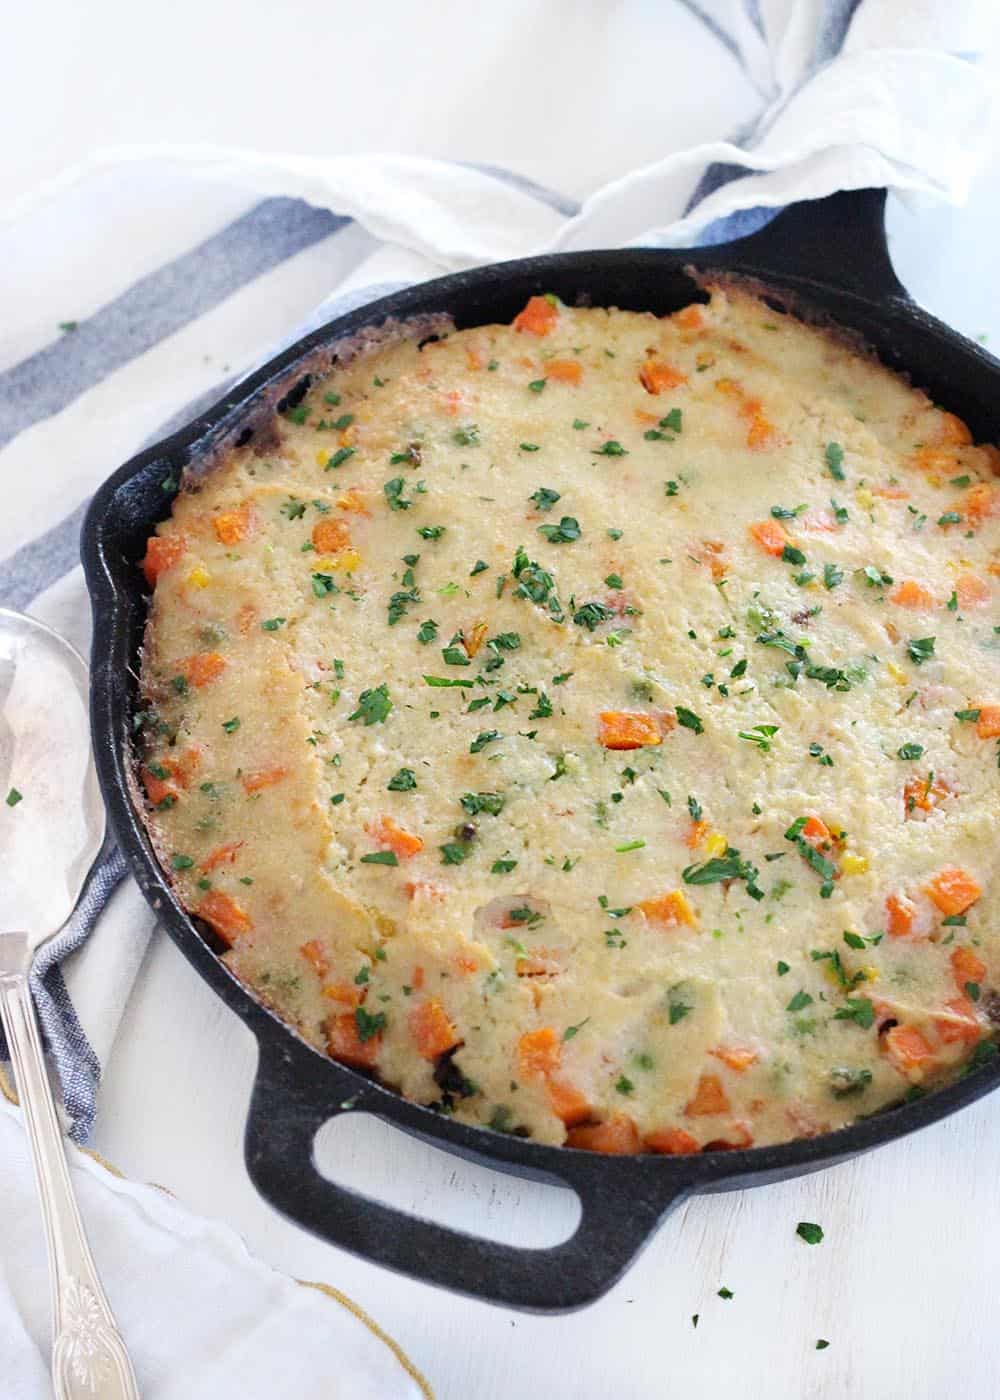 This Skillet Shepherd's Pie with Mashed Cauliflower is a lower-carb, veggie-packed, quick and easy version of shepherd's pie. It's the ultimate comfort food and the whole family will love it. #shepherdspie #lowcarb #mashedcauliflower #onepotmeals